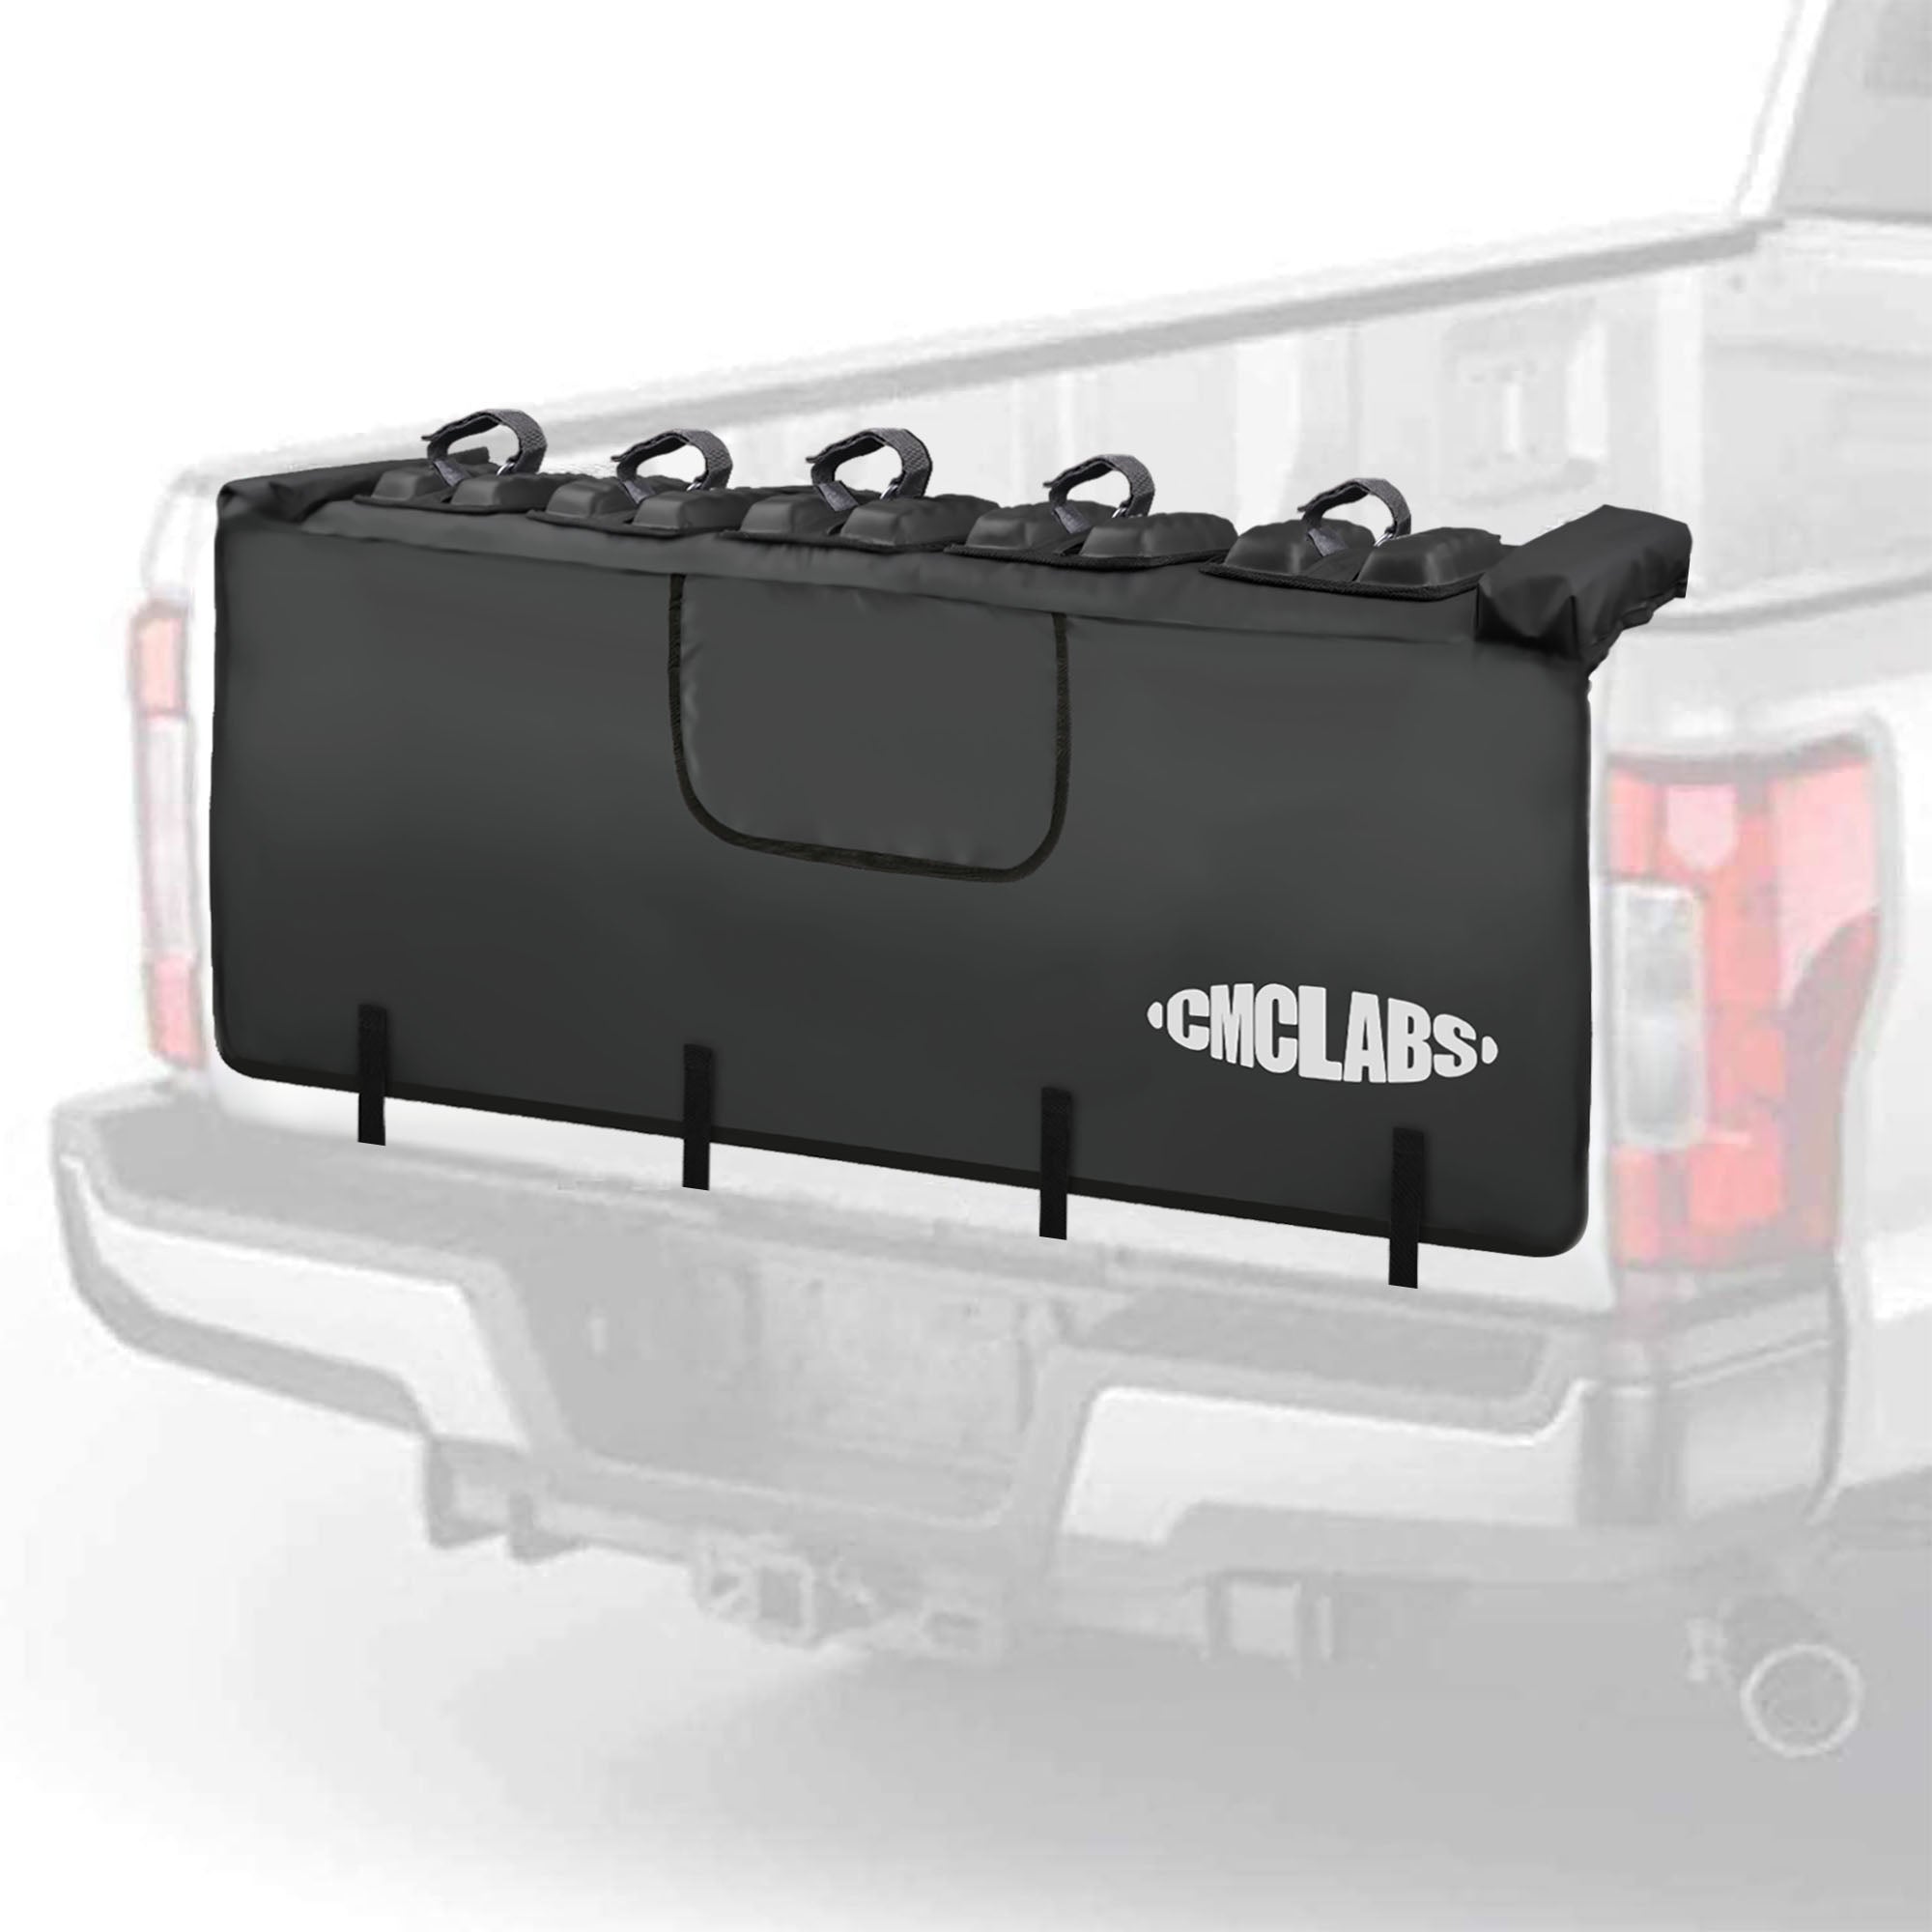 CMC Tailgate Pad for Mountain Bikes, Tailgate Trucks Protection Pad, Fits Most Trucks Carries Up to 5 Bikes